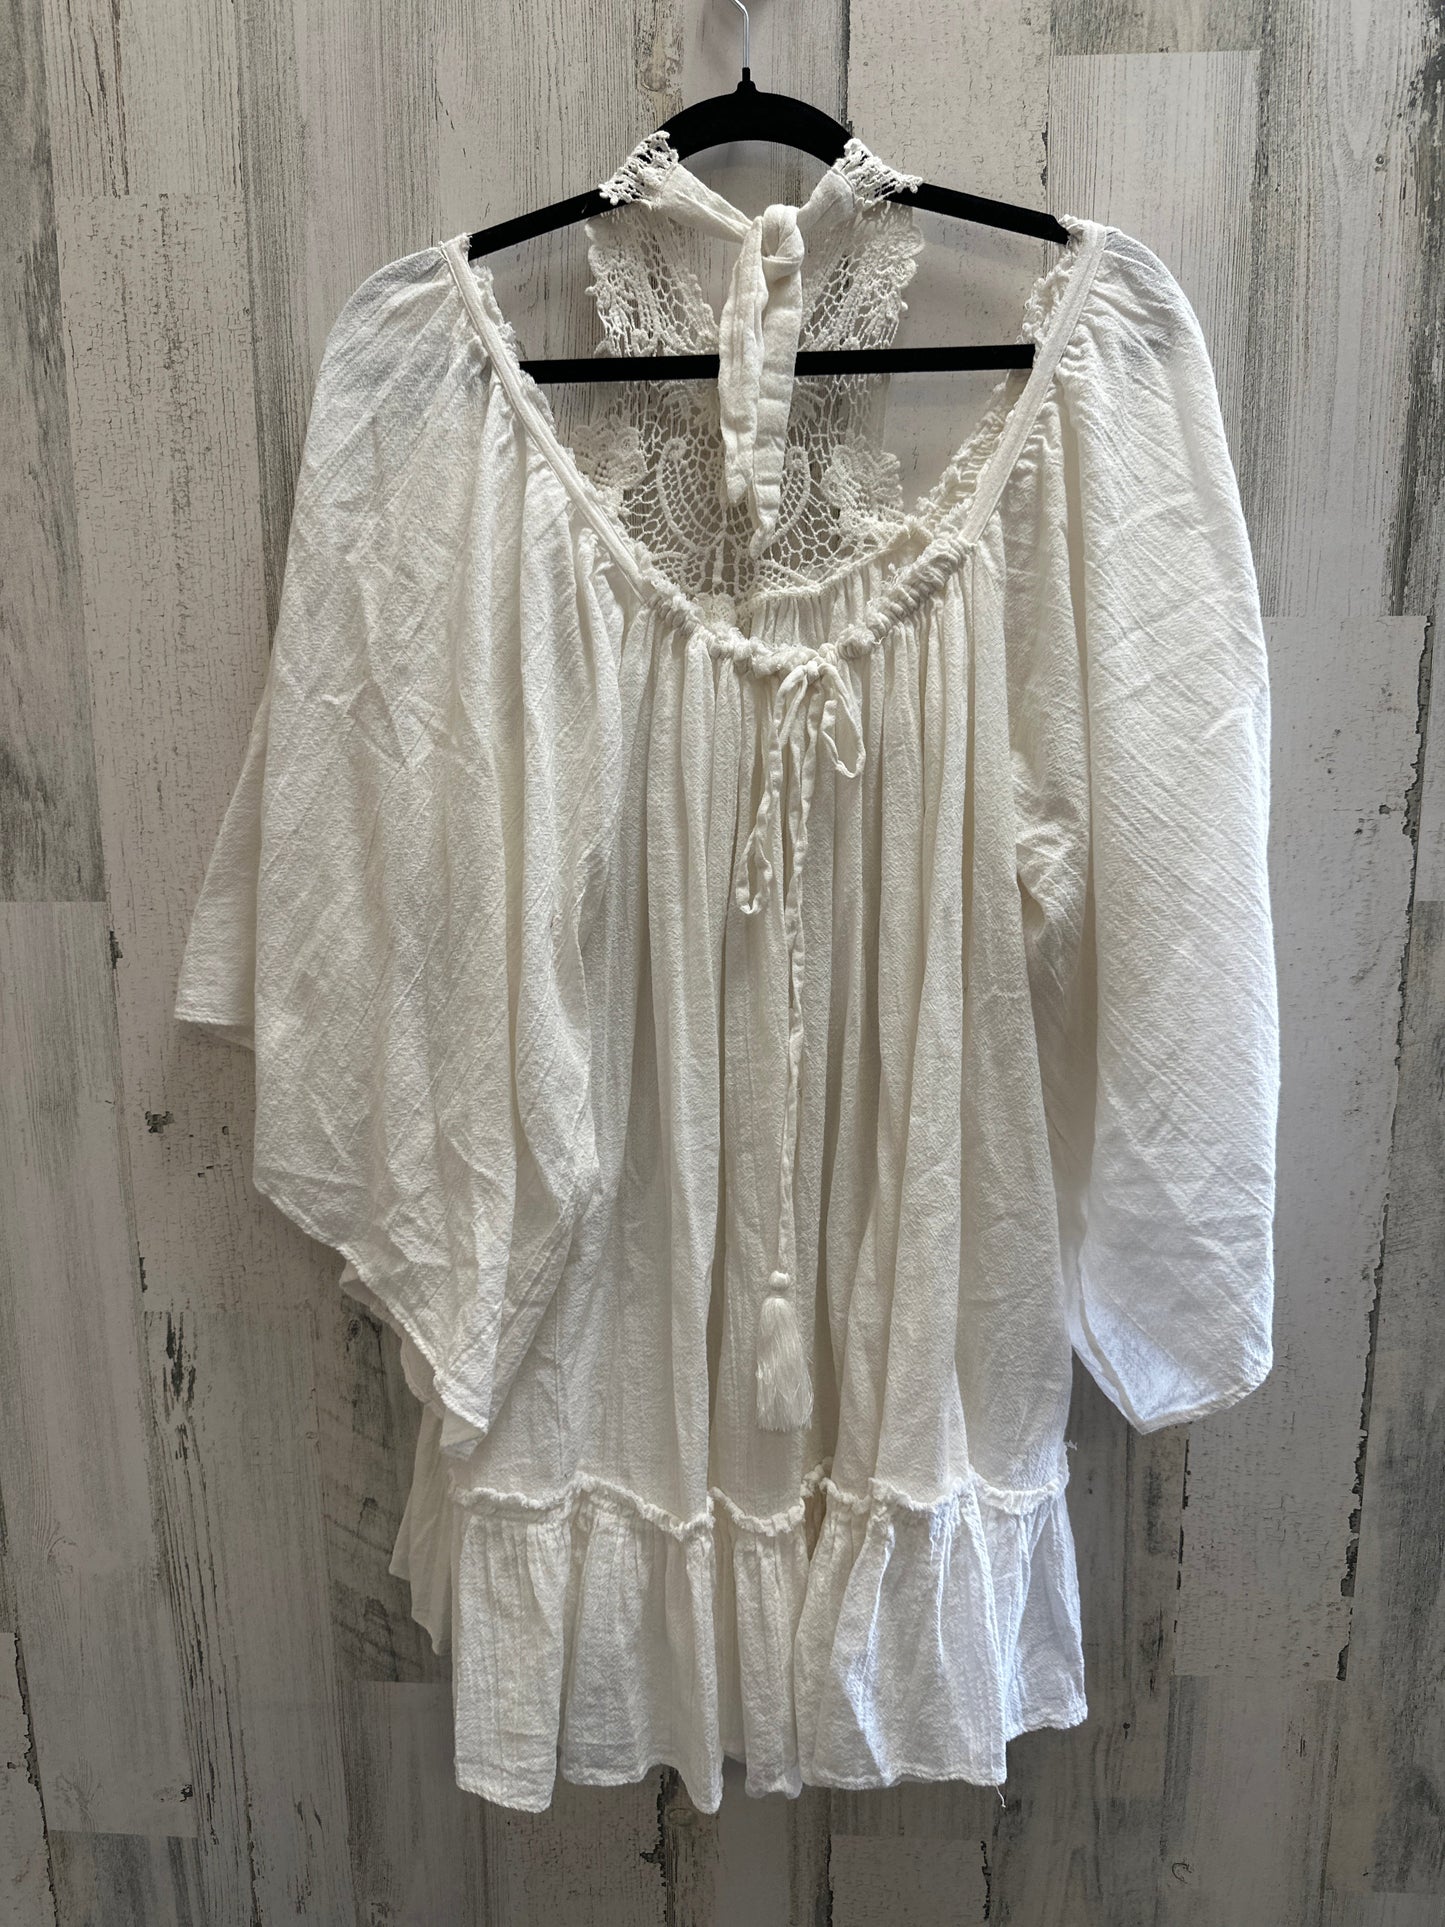 White Top Short Sleeve Free People, Size S